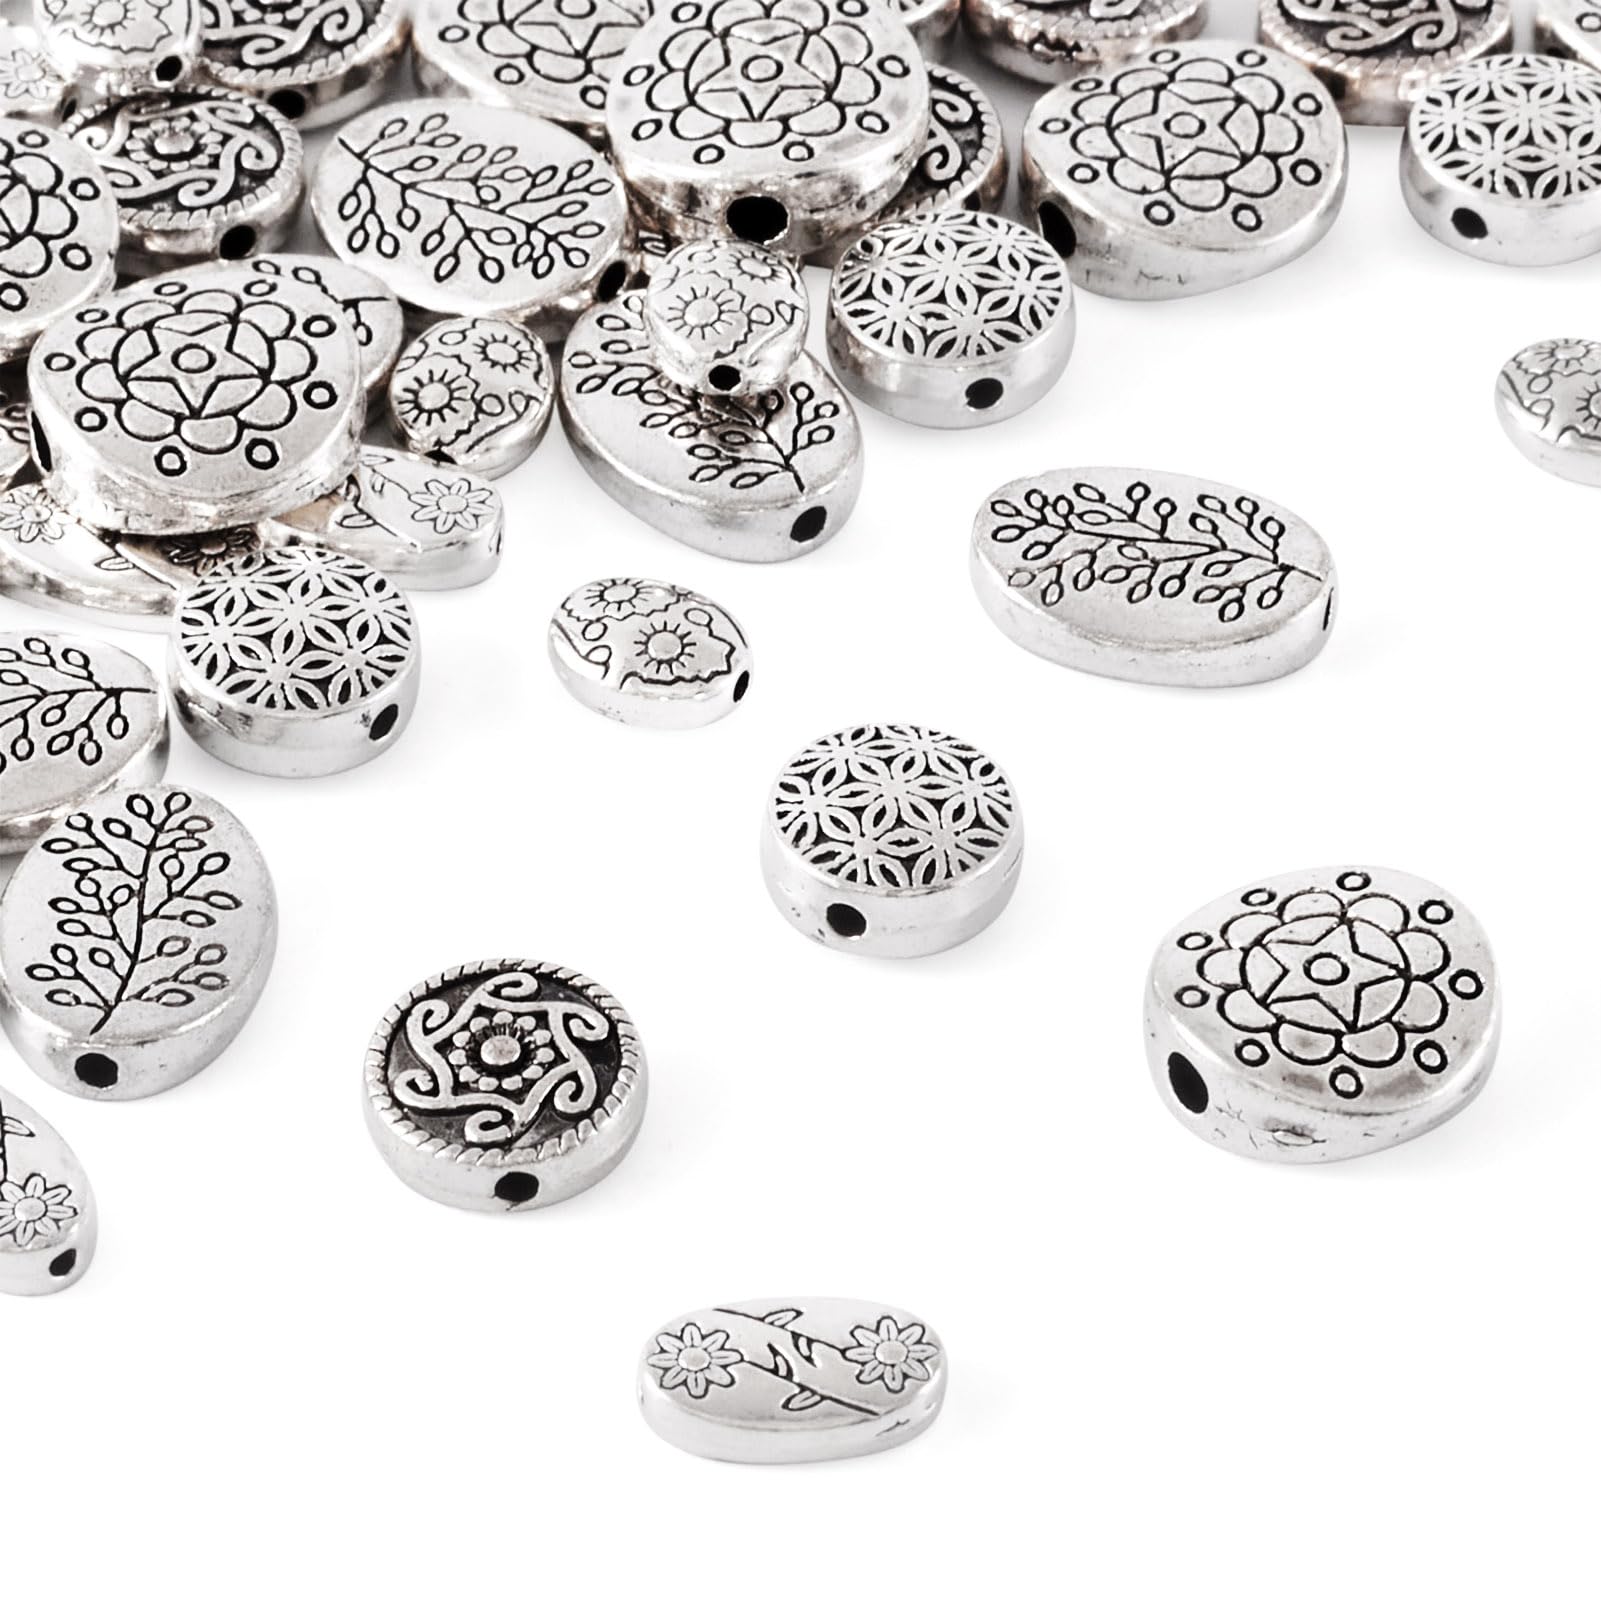 Pandahall 48Pcs Antique Silver Spacer Bead Tibetan Style Flower Spacer Beads 6 Style Alloy Rondelle Flat Round Oval Loose Bead Metal Spacer Beads for Bracelet Necklace Earring Jewelry Making